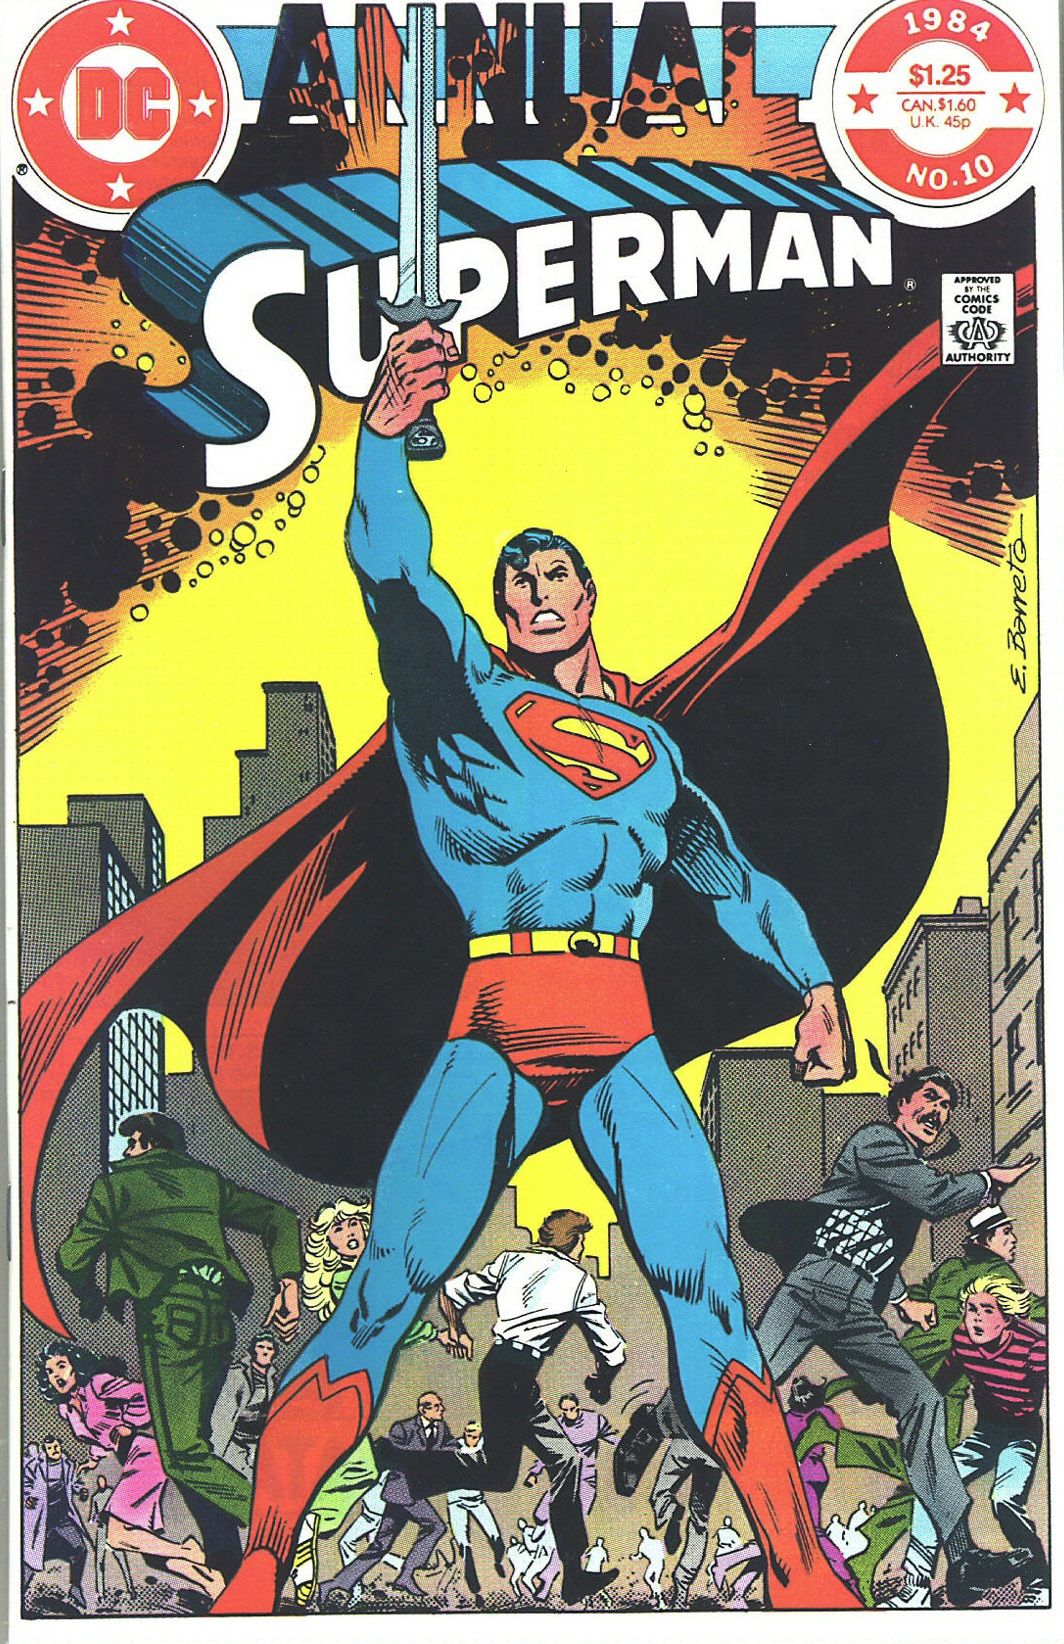 The cover of Superman Annual #10